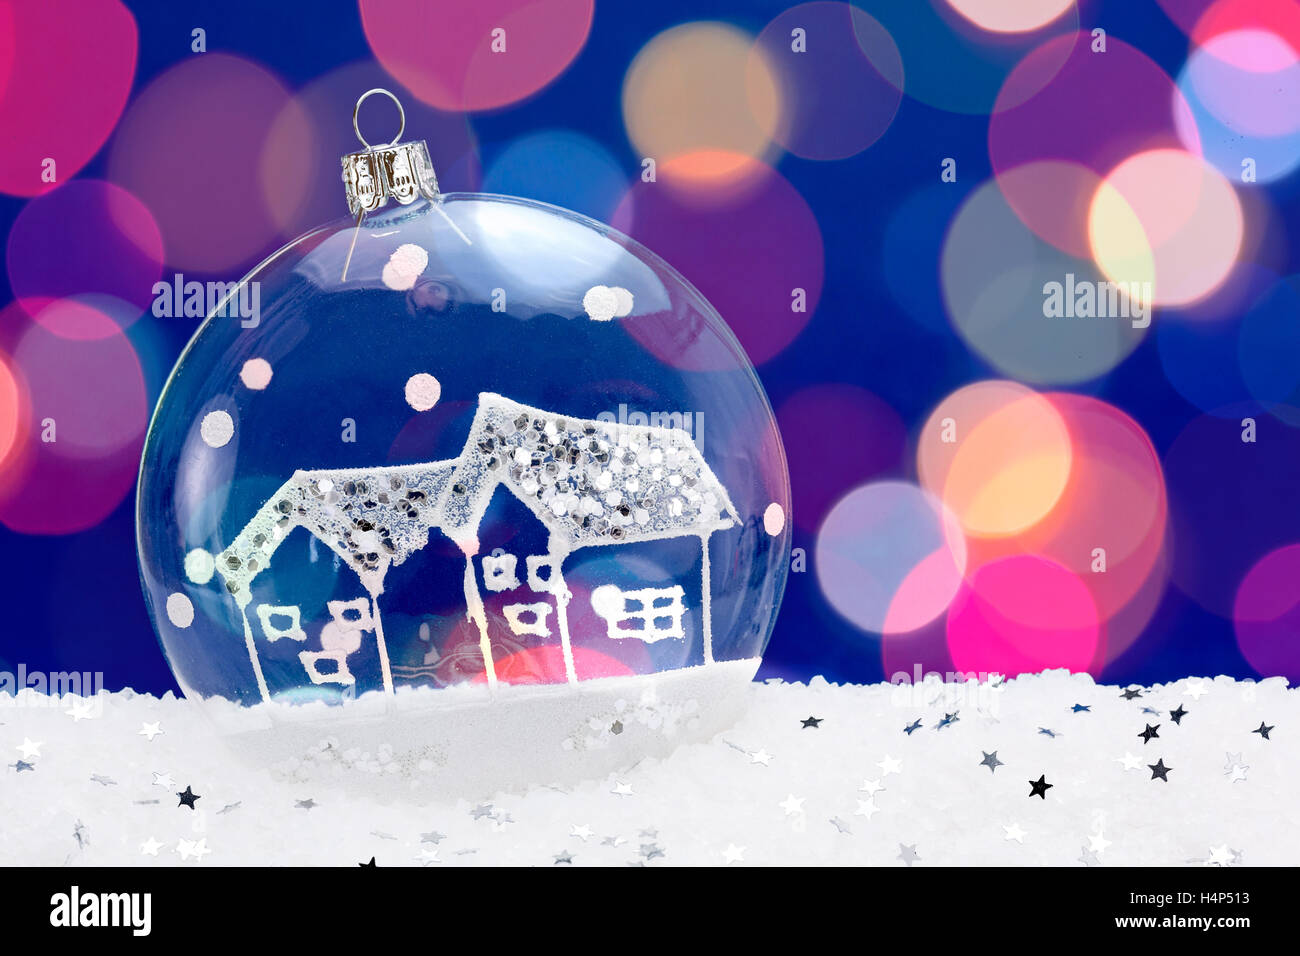 Transparent Christmas bauble on blue background with snow Stock Photo